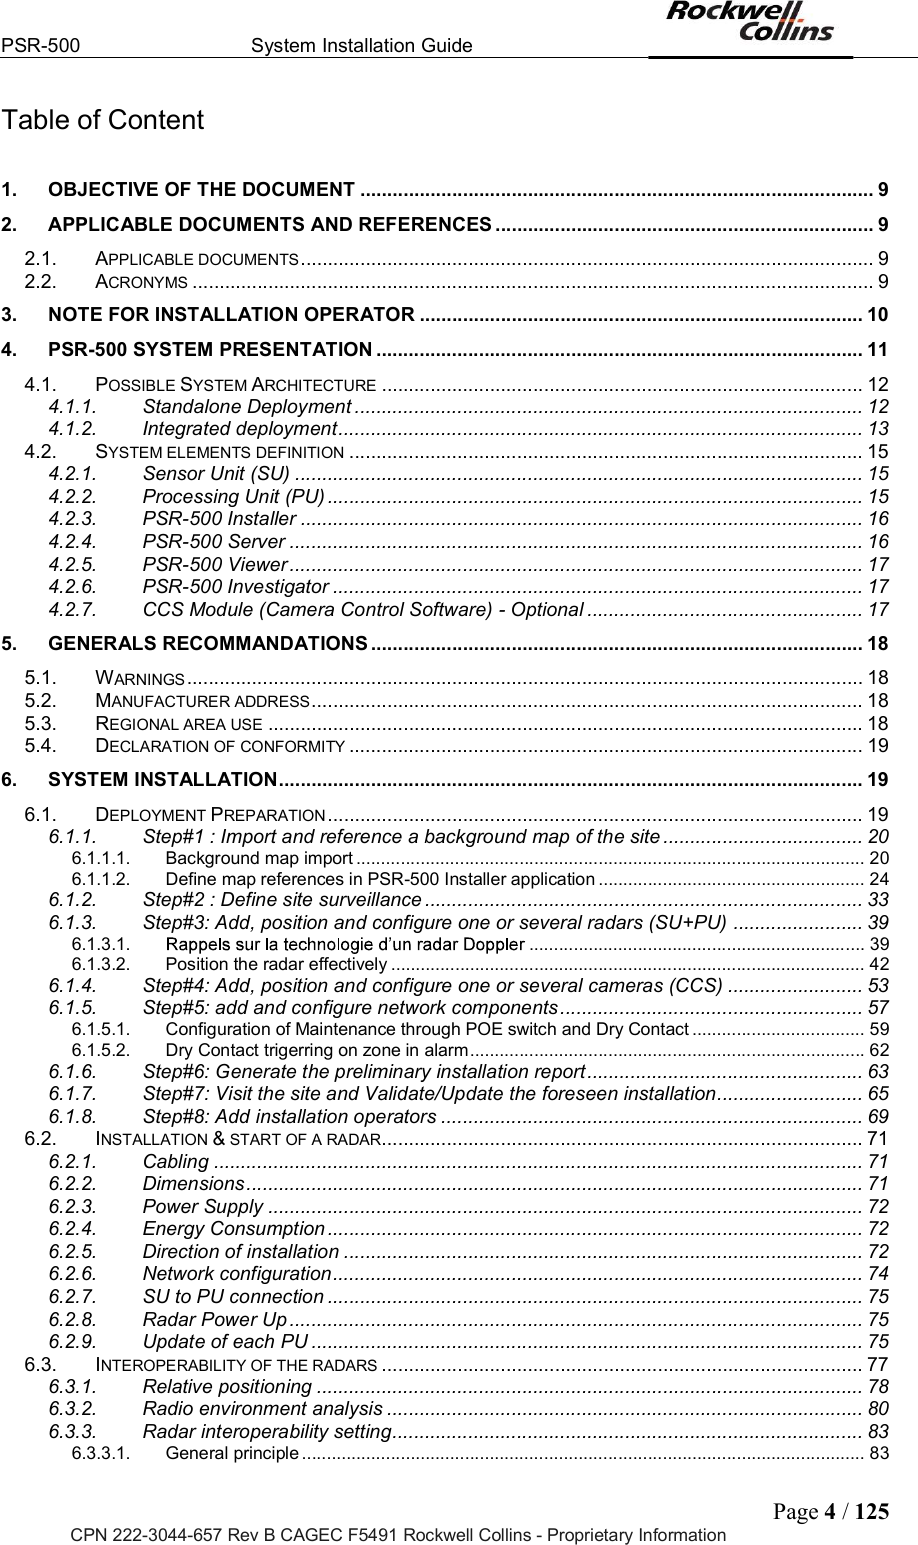 PSR-500  System Installation Guide  Page 4 / 125 CPN 222-3044-657 Rev B CAGEC F5491 Rockwell Collins - Proprietary Information Table of Content  1. OBJECTIVE OF THE DOCUMENT ............................................................................................... 9 2. APPLICABLE DOCUMENTS AND REFERENCES ...................................................................... 9 2.1. APPLICABLE DOCUMENTS .......................................................................................................... 9 2.2. ACRONYMS .............................................................................................................................. 9 3. NOTE FOR INSTALLATION OPERATOR .................................................................................. 10 4. PSR-500 SYSTEM PRESENTATION .......................................................................................... 11 4.1. POSSIBLE SYSTEM ARCHITECTURE ......................................................................................... 12 4.1.1. Standalone Deployment .............................................................................................. 12 4.1.2. Integrated deployment ................................................................................................. 13 4.2. SYSTEM ELEMENTS DEFINITION ............................................................................................... 15 4.2.1. Sensor Unit (SU) ......................................................................................................... 15 4.2.2. Processing Unit (PU) ................................................................................................... 15 4.2.3. PSR-500 Installer ........................................................................................................ 16 4.2.4. PSR-500 Server .......................................................................................................... 16 4.2.5. PSR-500 Viewer .......................................................................................................... 17 4.2.6. PSR-500 Investigator .................................................................................................. 17 4.2.7. CCS Module (Camera Control Software) - Optional ................................................... 17 5. GENERALS RECOMMANDATIONS ........................................................................................... 18 5.1. WARNINGS ............................................................................................................................. 18 5.2. MANUFACTURER ADDRESS ...................................................................................................... 18 5.3. REGIONAL AREA USE .............................................................................................................. 18 5.4. DECLARATION OF CONFORMITY ............................................................................................... 19 6. SYSTEM INSTALLATION ............................................................................................................ 19 6.1. DEPLOYMENT PREPARATION ................................................................................................... 19 6.1.1. Step#1 : Import and reference a background map of the site ..................................... 20 6.1.1.1. Background map import ....................................................................................................... 20 6.1.1.2. Define map references in PSR-500 Installer application ...................................................... 24 6.1.2. Step#2 : Define site surveillance ................................................................................. 33 6.1.3. Step#3: Add, position and configure one or several radars (SU+PU) ........................ 39 6.1.3.1.  .................................................................... 39 6.1.3.2. Position the radar effectively ................................................................................................ 42 6.1.4. Step#4: Add, position and configure one or several cameras (CCS) ......................... 53 6.1.5. Step#5: add and configure network components ........................................................ 57 6.1.5.1. Configuration of Maintenance through POE switch and Dry Contact ................................... 59 6.1.5.2. Dry Contact trigerring on zone in alarm ................................................................................ 62 6.1.6. Step#6: Generate the preliminary installation report ................................................... 63 6.1.7. Step#7: Visit the site and Validate/Update the foreseen installation ........................... 65 6.1.8. Step#8: Add installation operators .............................................................................. 69 6.2. INSTALLATION &amp; START OF A RADAR ......................................................................................... 71 6.2.1. Cabling ........................................................................................................................ 71 6.2.2. Dimensions .................................................................................................................. 71 6.2.3. Power Supply .............................................................................................................. 72 6.2.4. Energy Consumption ................................................................................................... 72 6.2.5. Direction of installation ................................................................................................ 72 6.2.6. Network configuration .................................................................................................. 74 6.2.7. SU to PU connection ................................................................................................... 75 6.2.8. Radar Power Up .......................................................................................................... 75 6.2.9. Update of each PU ...................................................................................................... 75 6.3. INTEROPERABILITY OF THE RADARS ......................................................................................... 77 6.3.1. Relative positioning ..................................................................................................... 78 6.3.2. Radio environment analysis ........................................................................................ 80 6.3.3. Radar interoperability setting ....................................................................................... 83 6.3.3.1. General principle .................................................................................................................. 83 